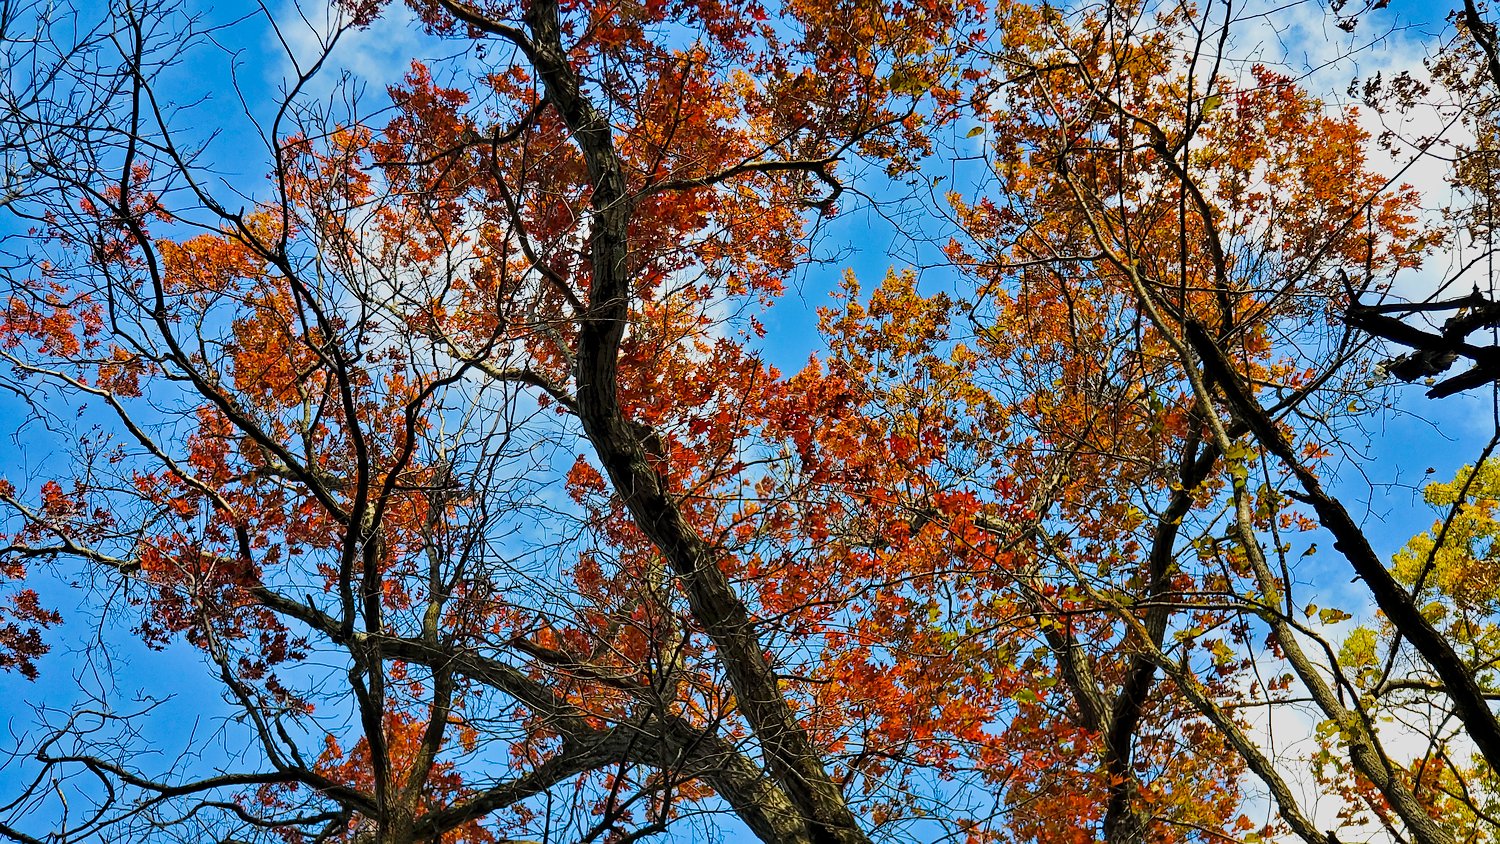 Red, orange, and yellow leaves against blue sky at Rush Creek Conservation Area.